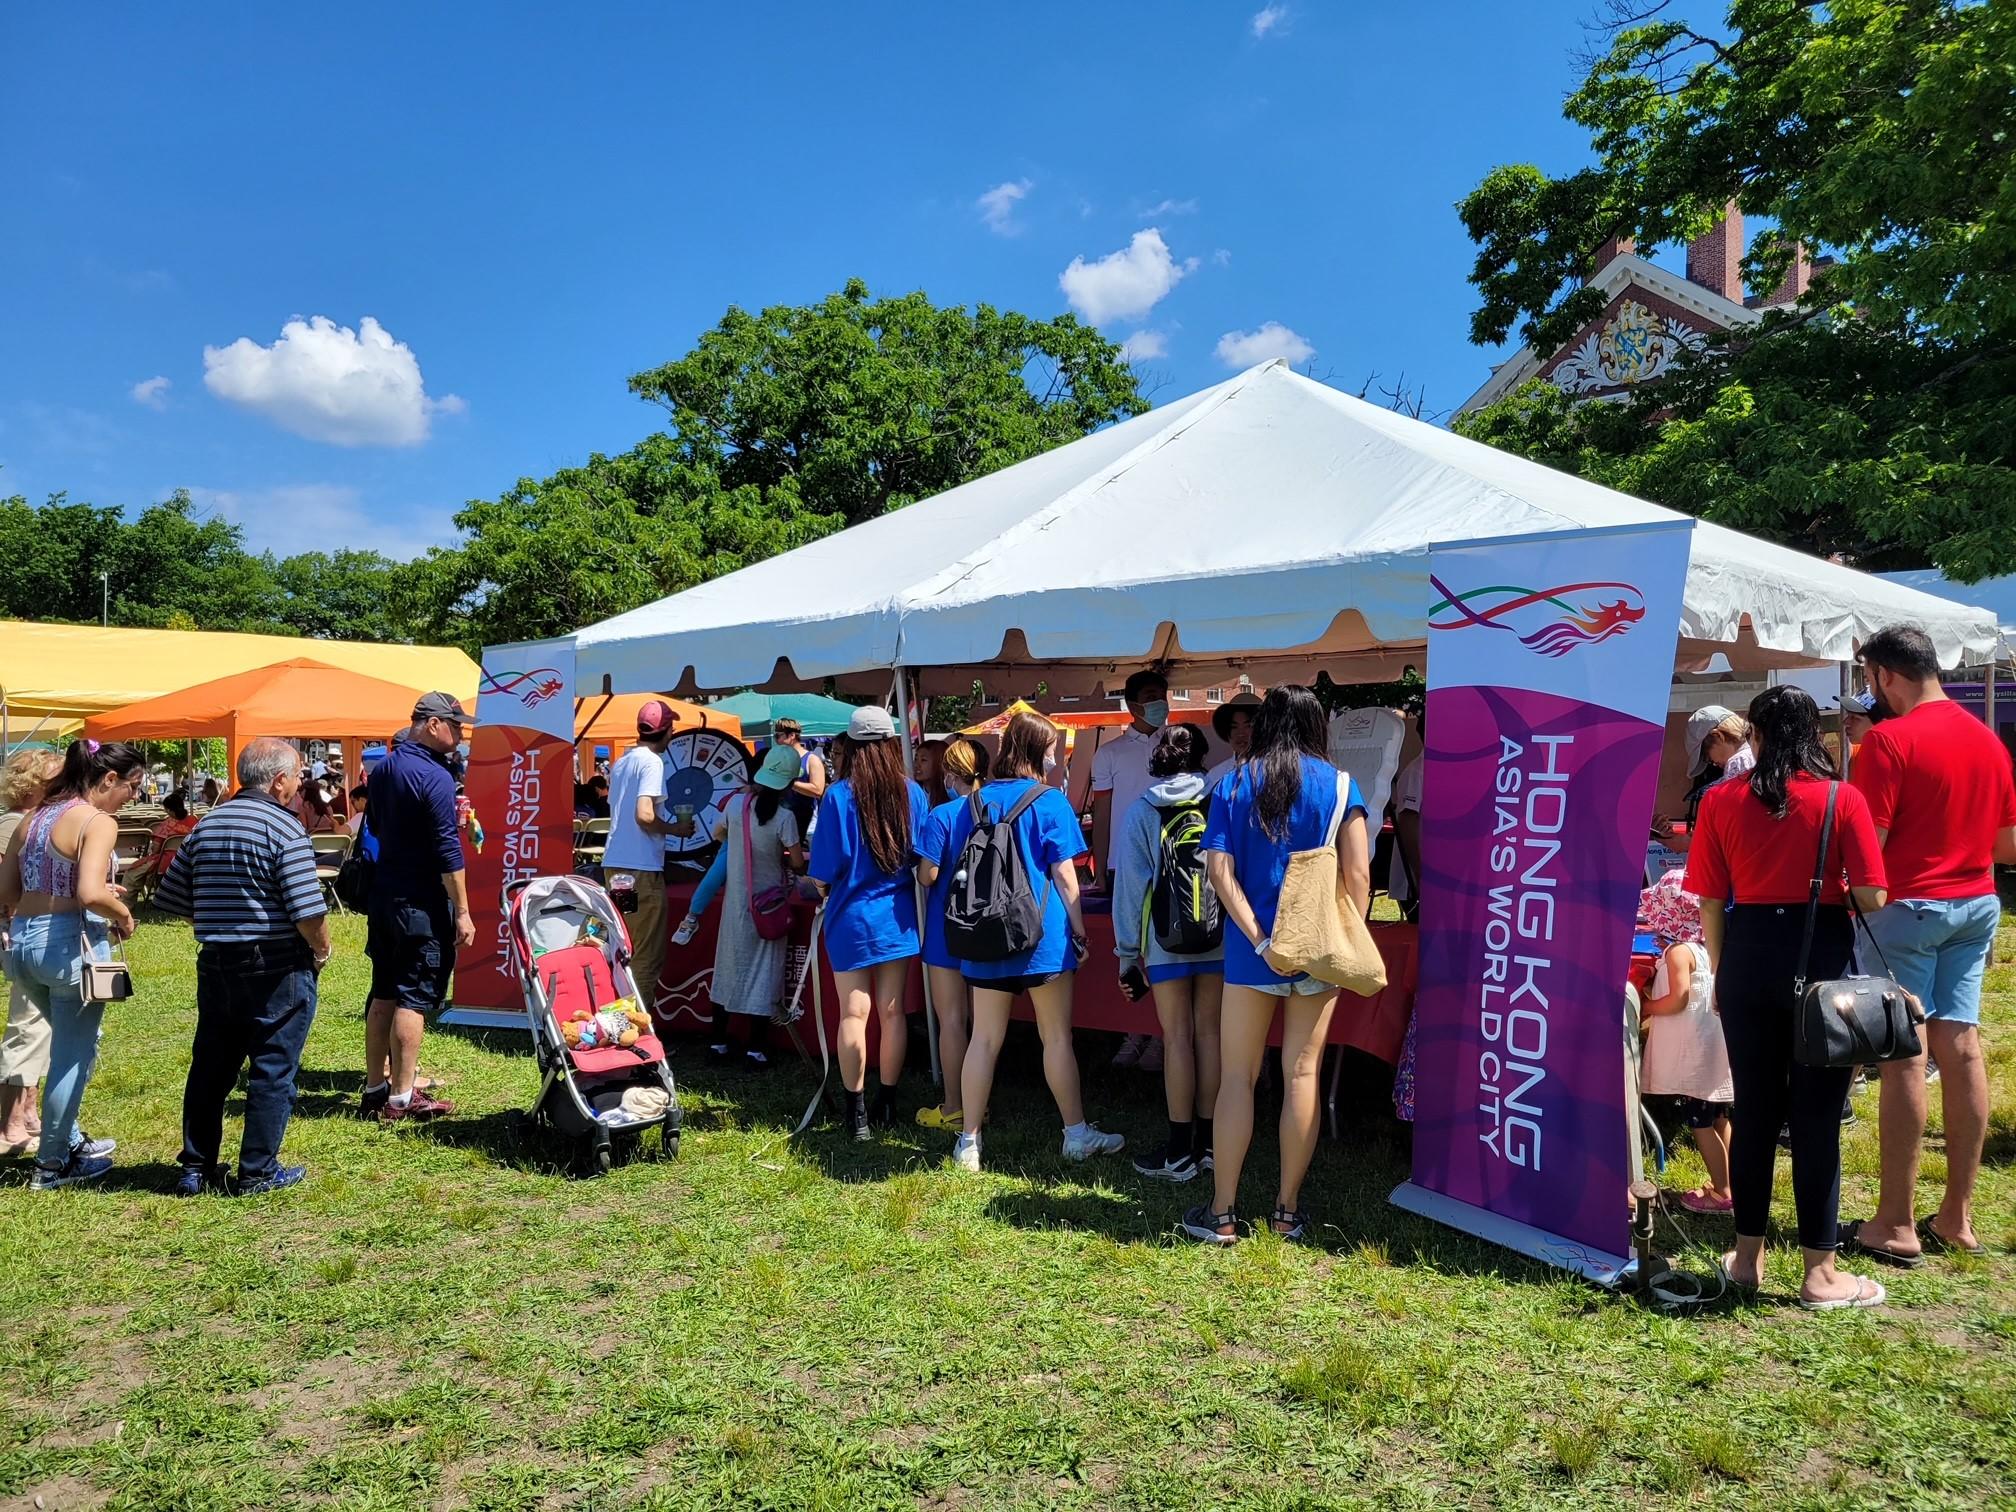 The 43rd Boston Hong Kong Dragon Boat Festival returned to the Charles River today (June 12, Boston time), attracting over 30 000 revelers.

